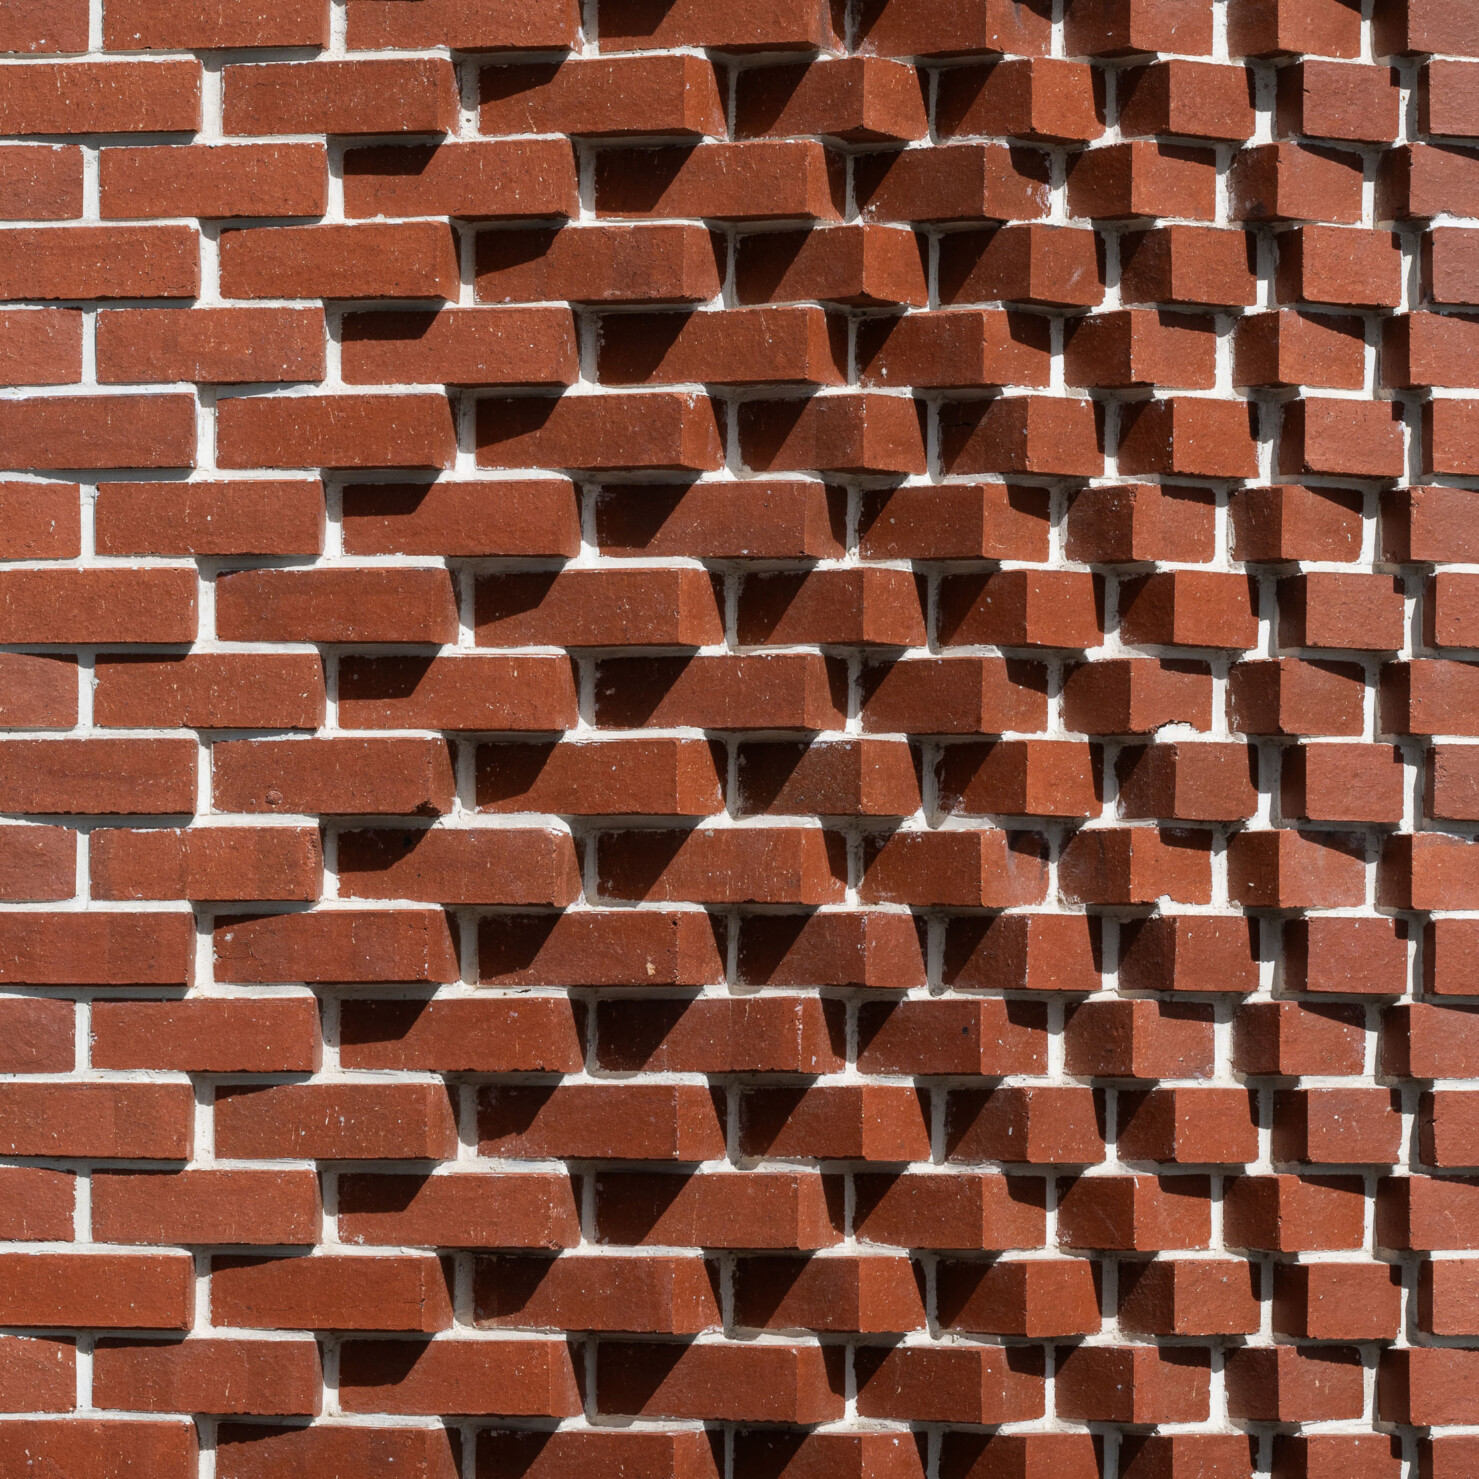 Detail of extruded heritage red brickwork that provides a dynamic pattern inspired by a basketball game's rhythm. The bricks appear to 'ripple' with the play of light and shadow on the building.